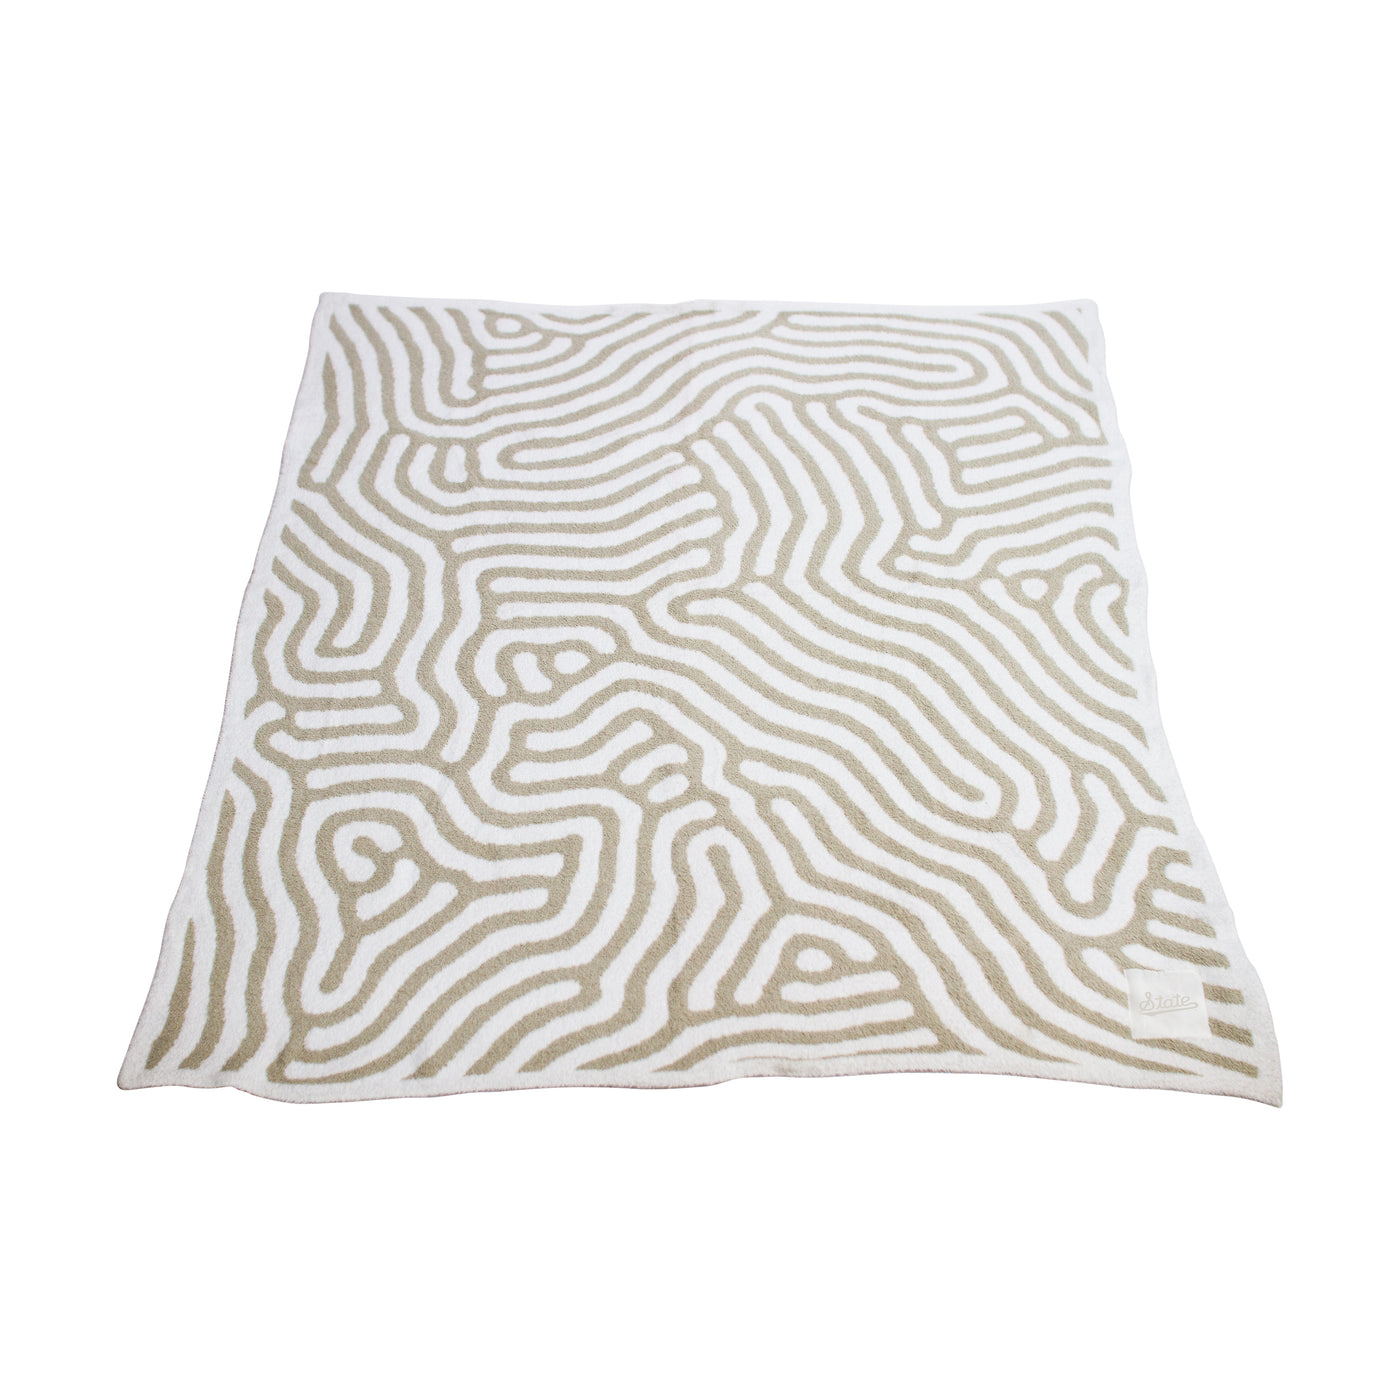 Mississippi State Script Luxe Dreams Throw